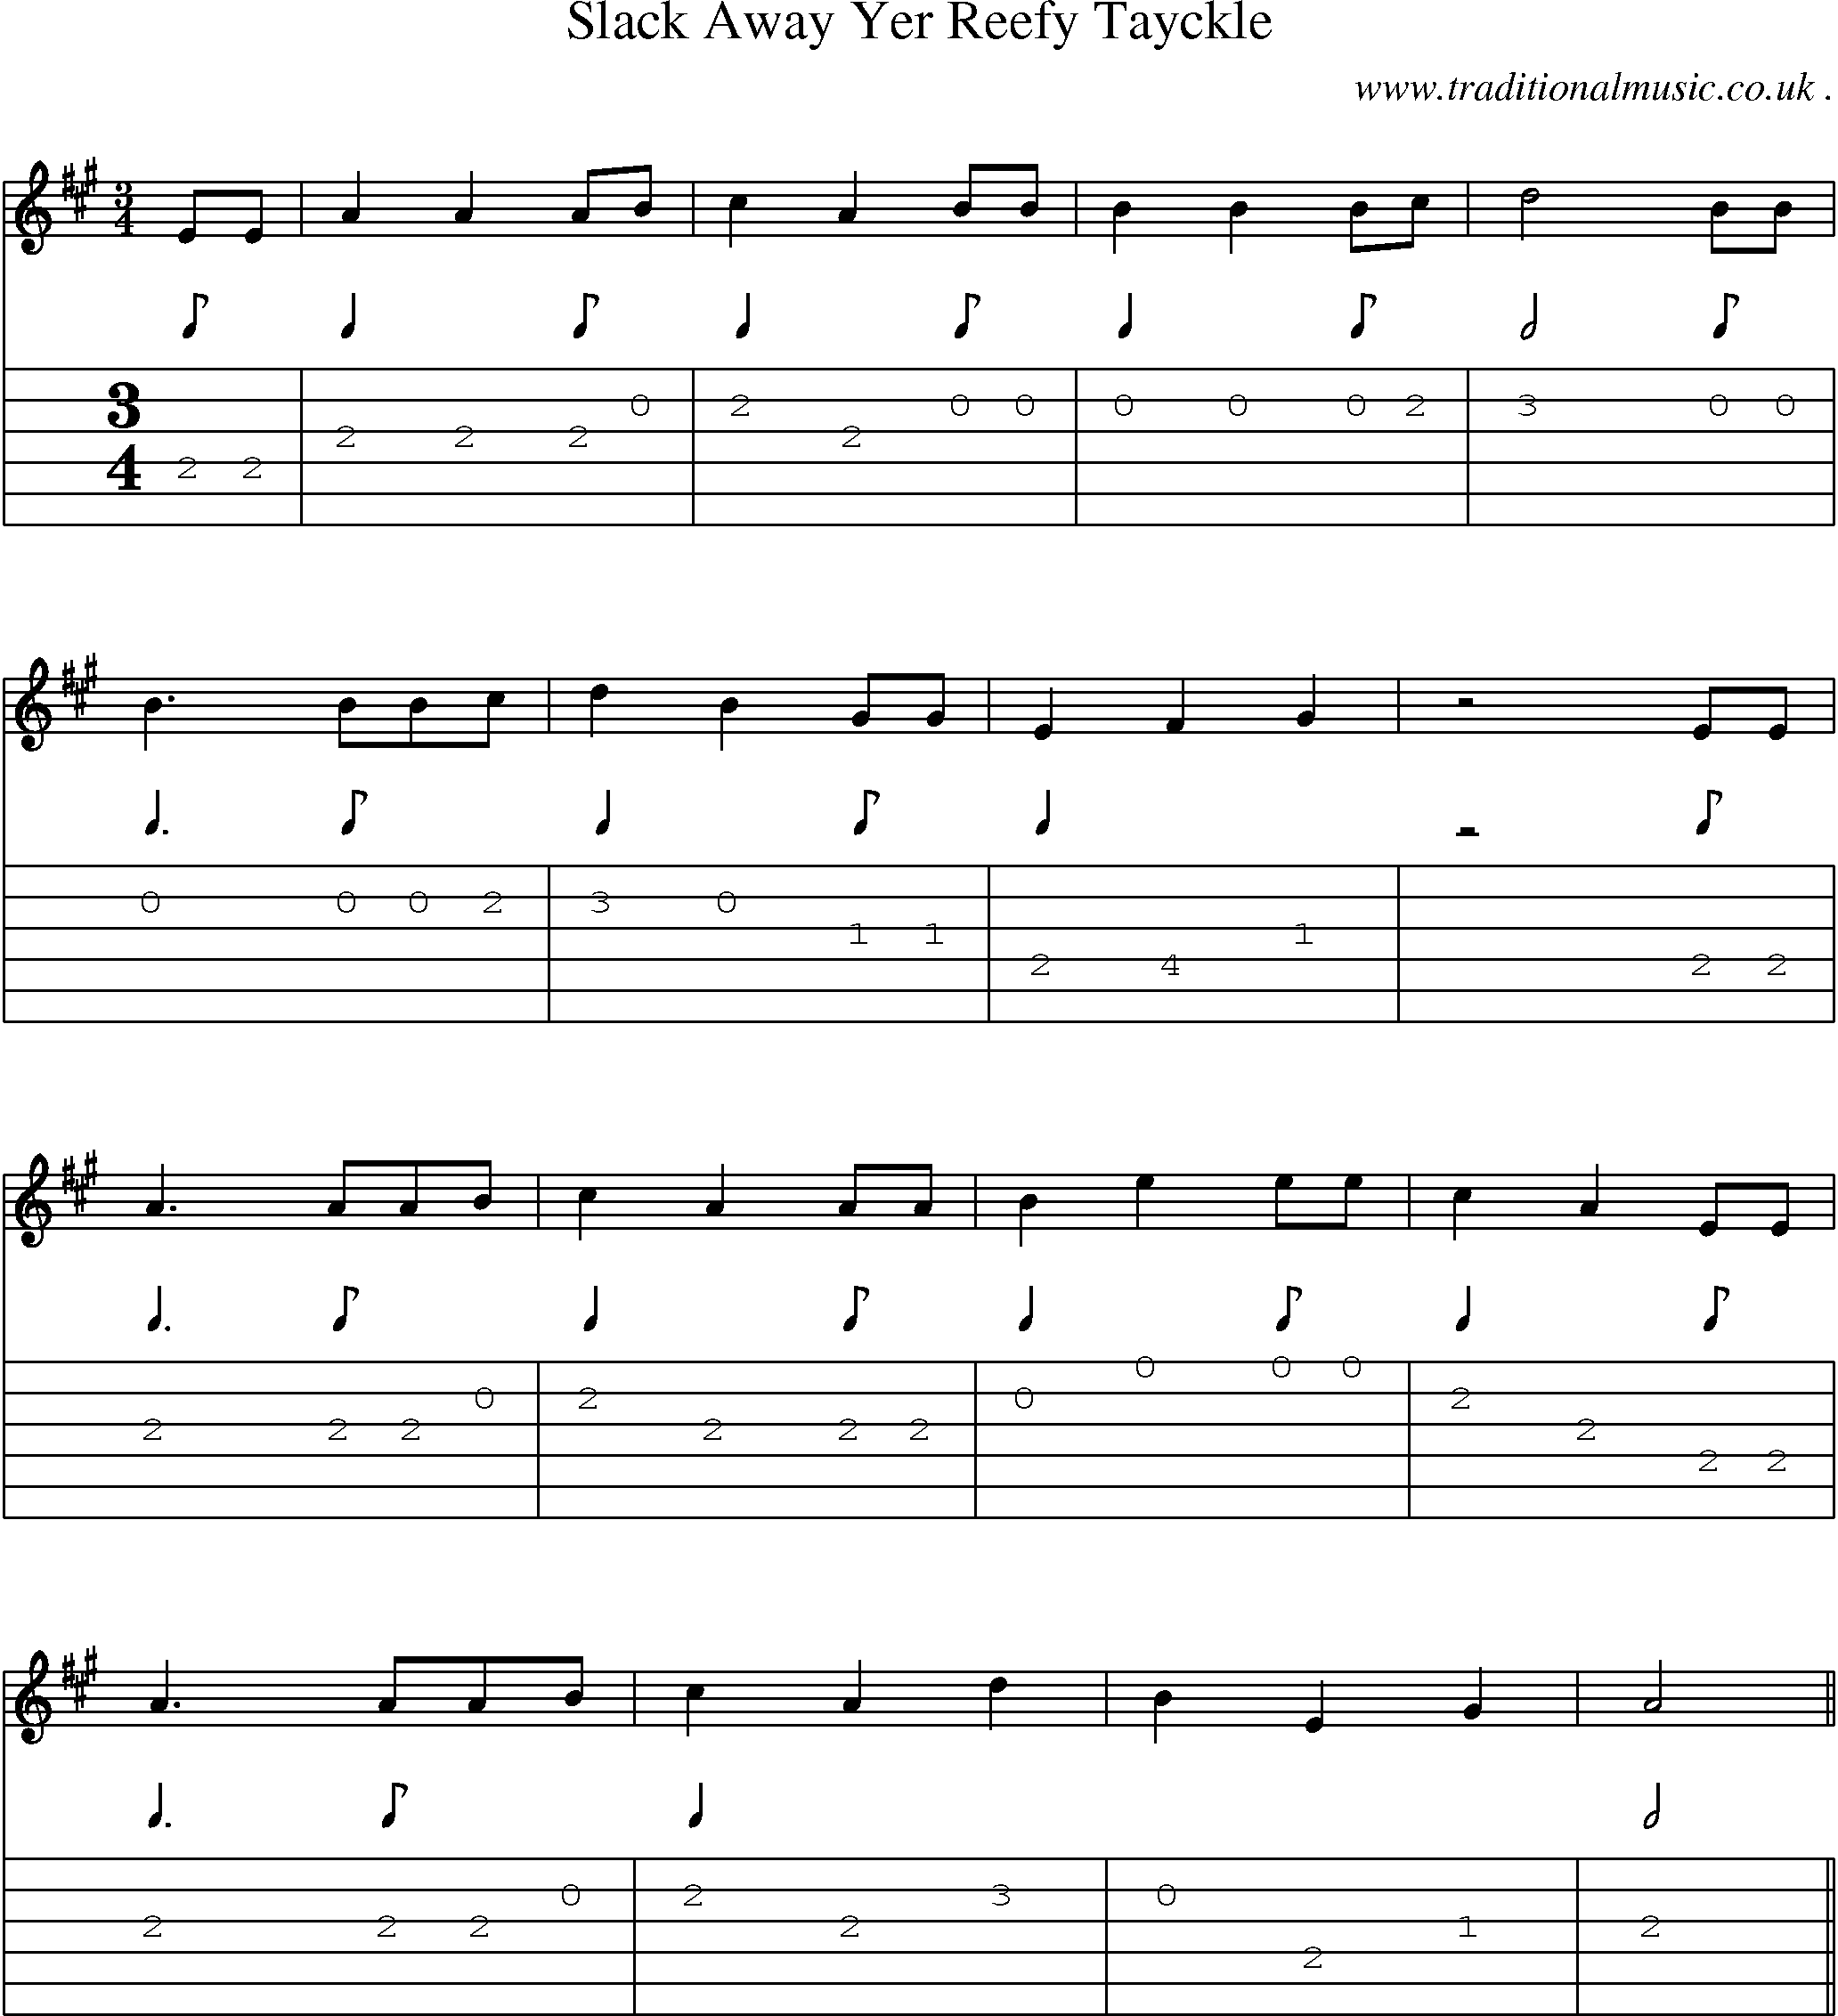 Sheet-Music and Guitar Tabs for Slack Away Yer Reefy Tayckle